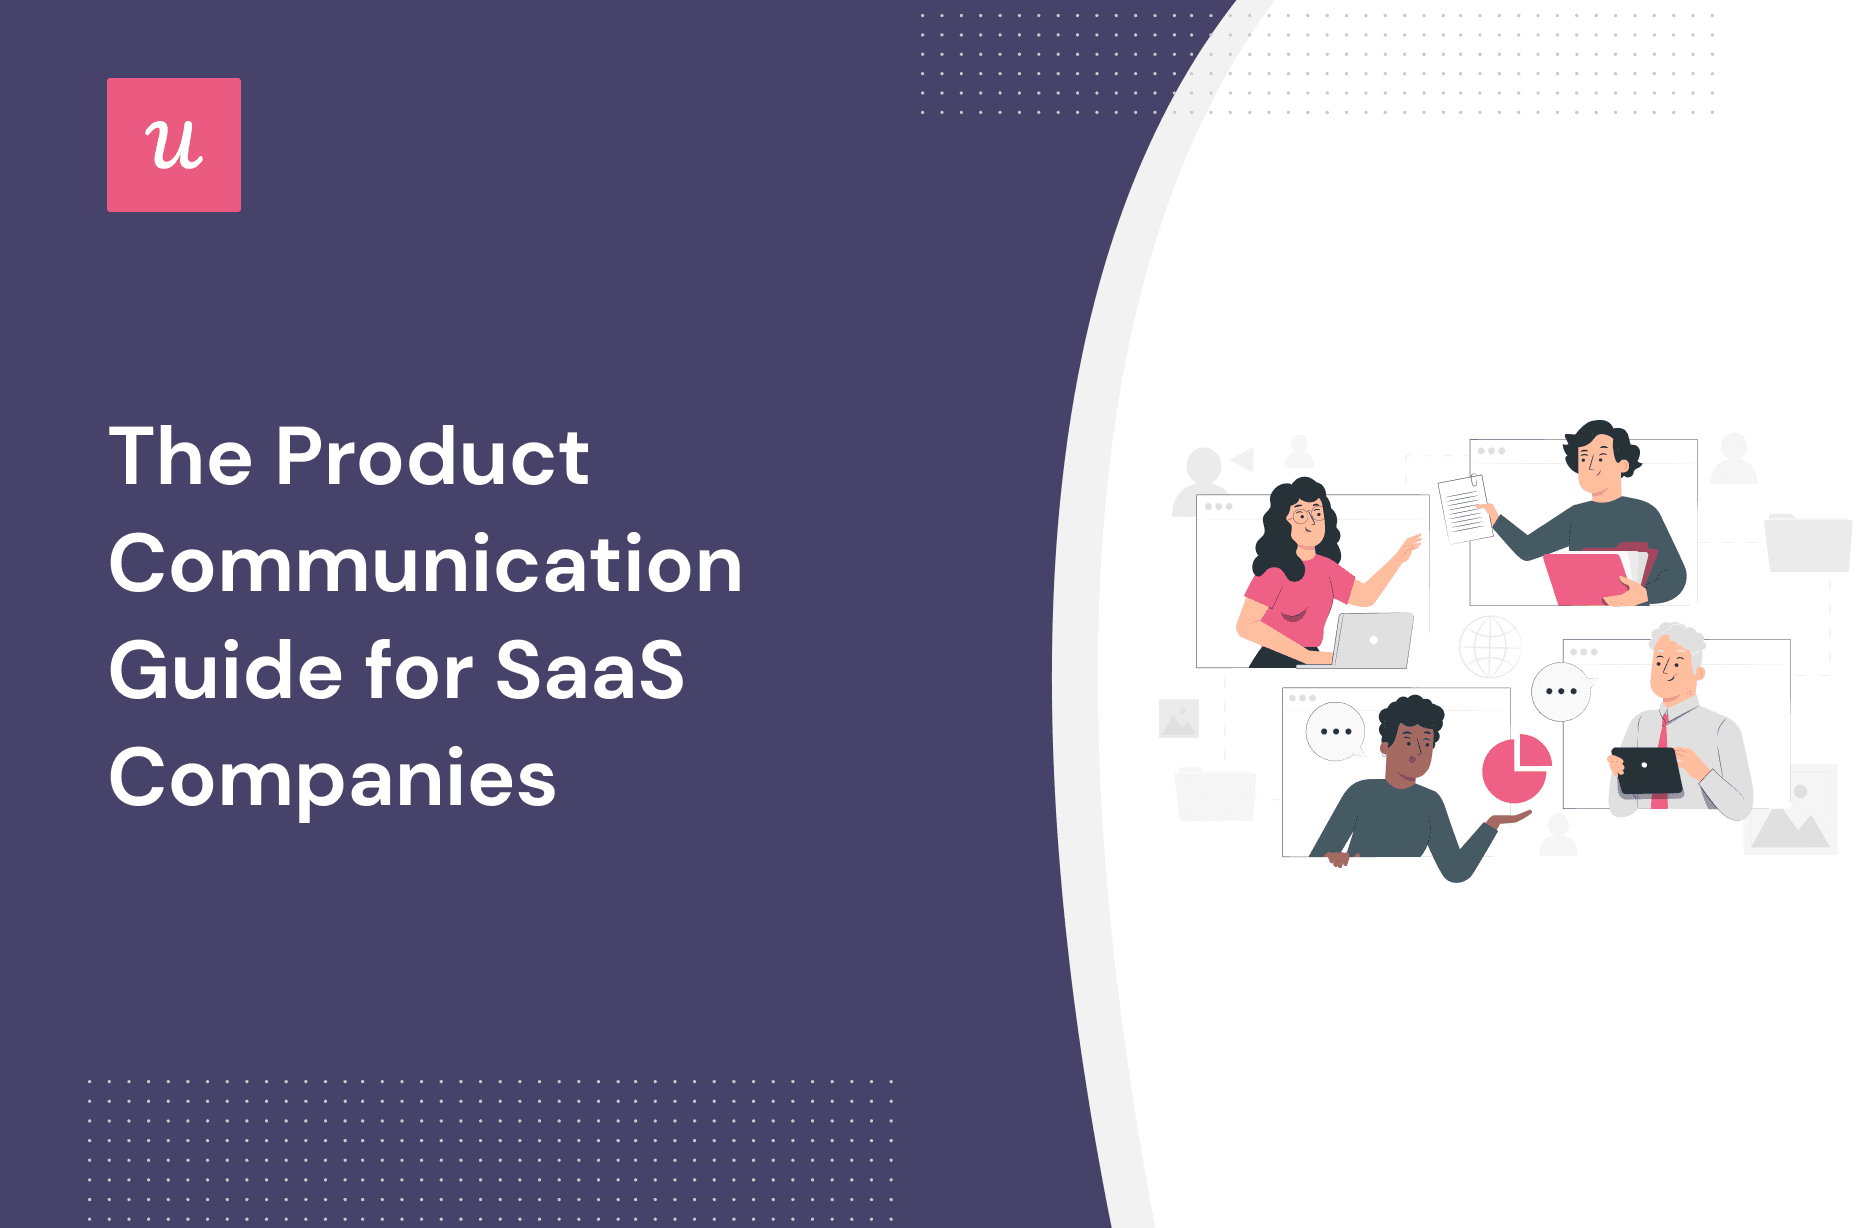 The Product Communication Guide for SaaS Companies cover